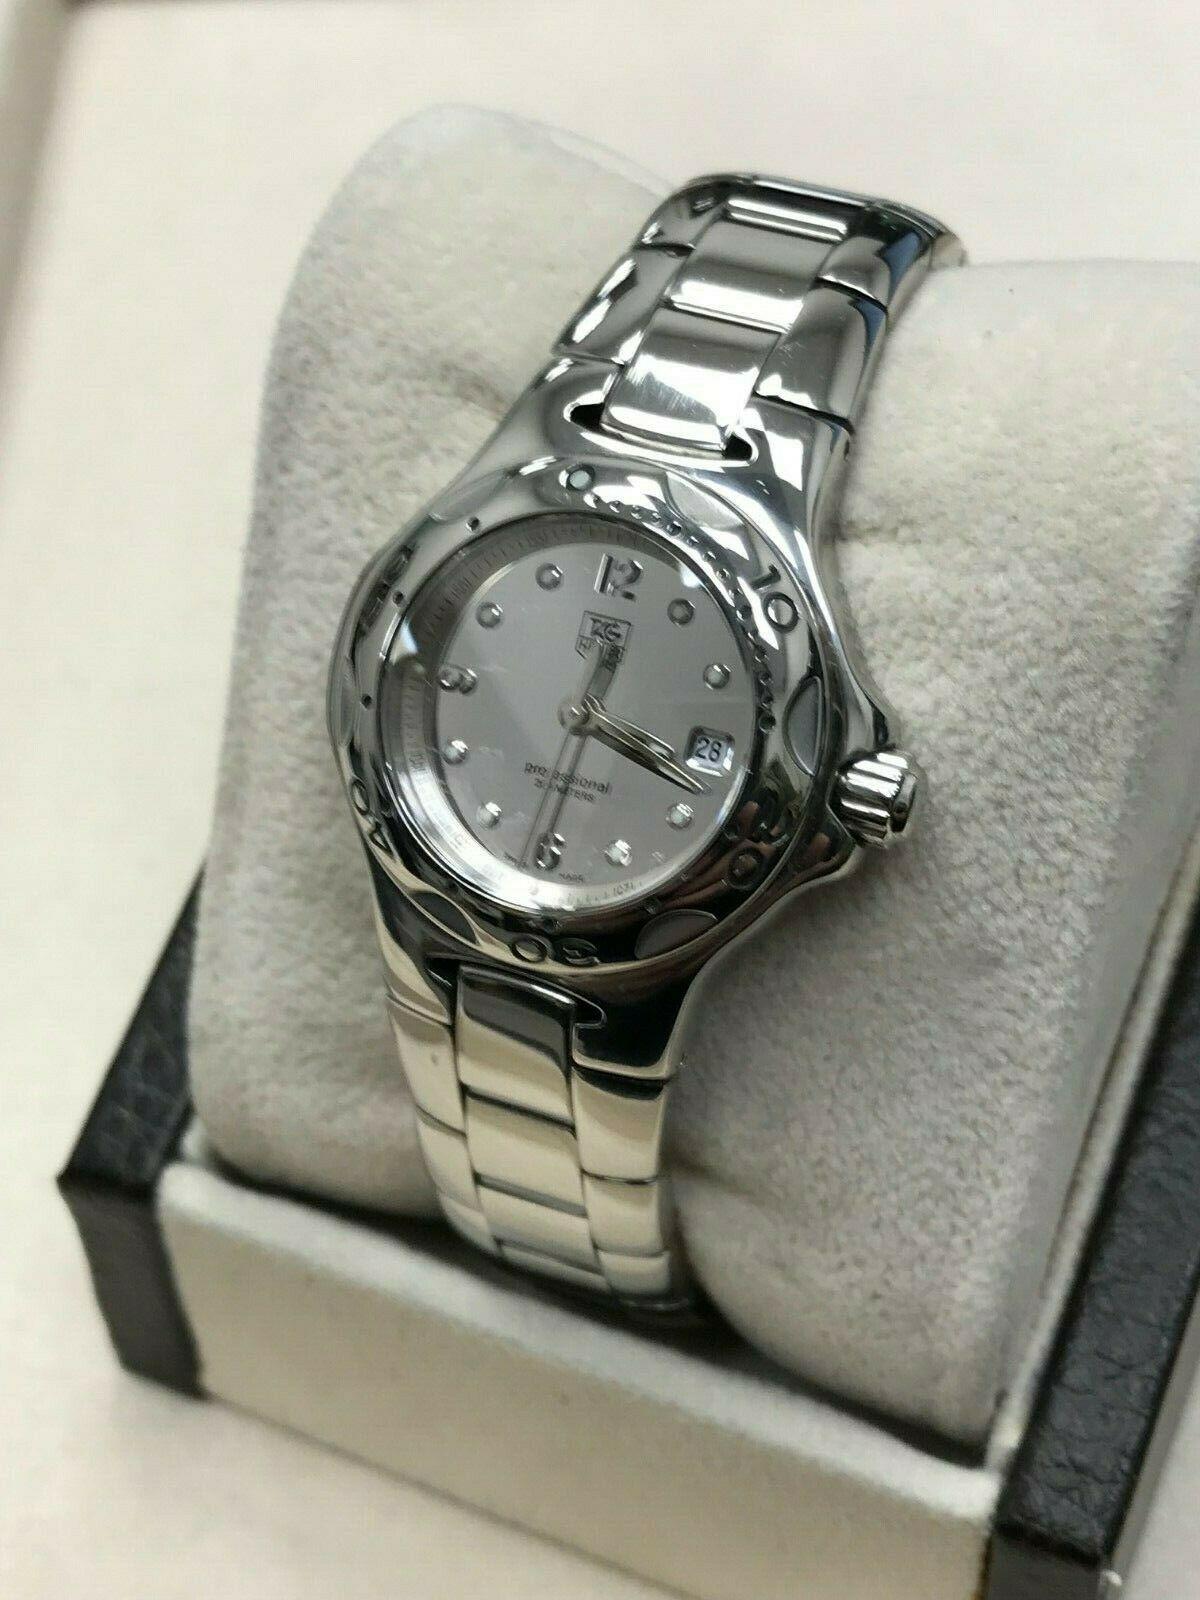 Style Number: WL131C.BA0710 
Model: Kirium
Case Material: Stainless Steel 
Band: Stainless Steel
Bezel: Stainless Steel 
Dial: Original Factory Mirror/Silver Dial 
Face: Sapphire Crystal - Small Blemishes on crystal
Case Size: 29mm

Includes: